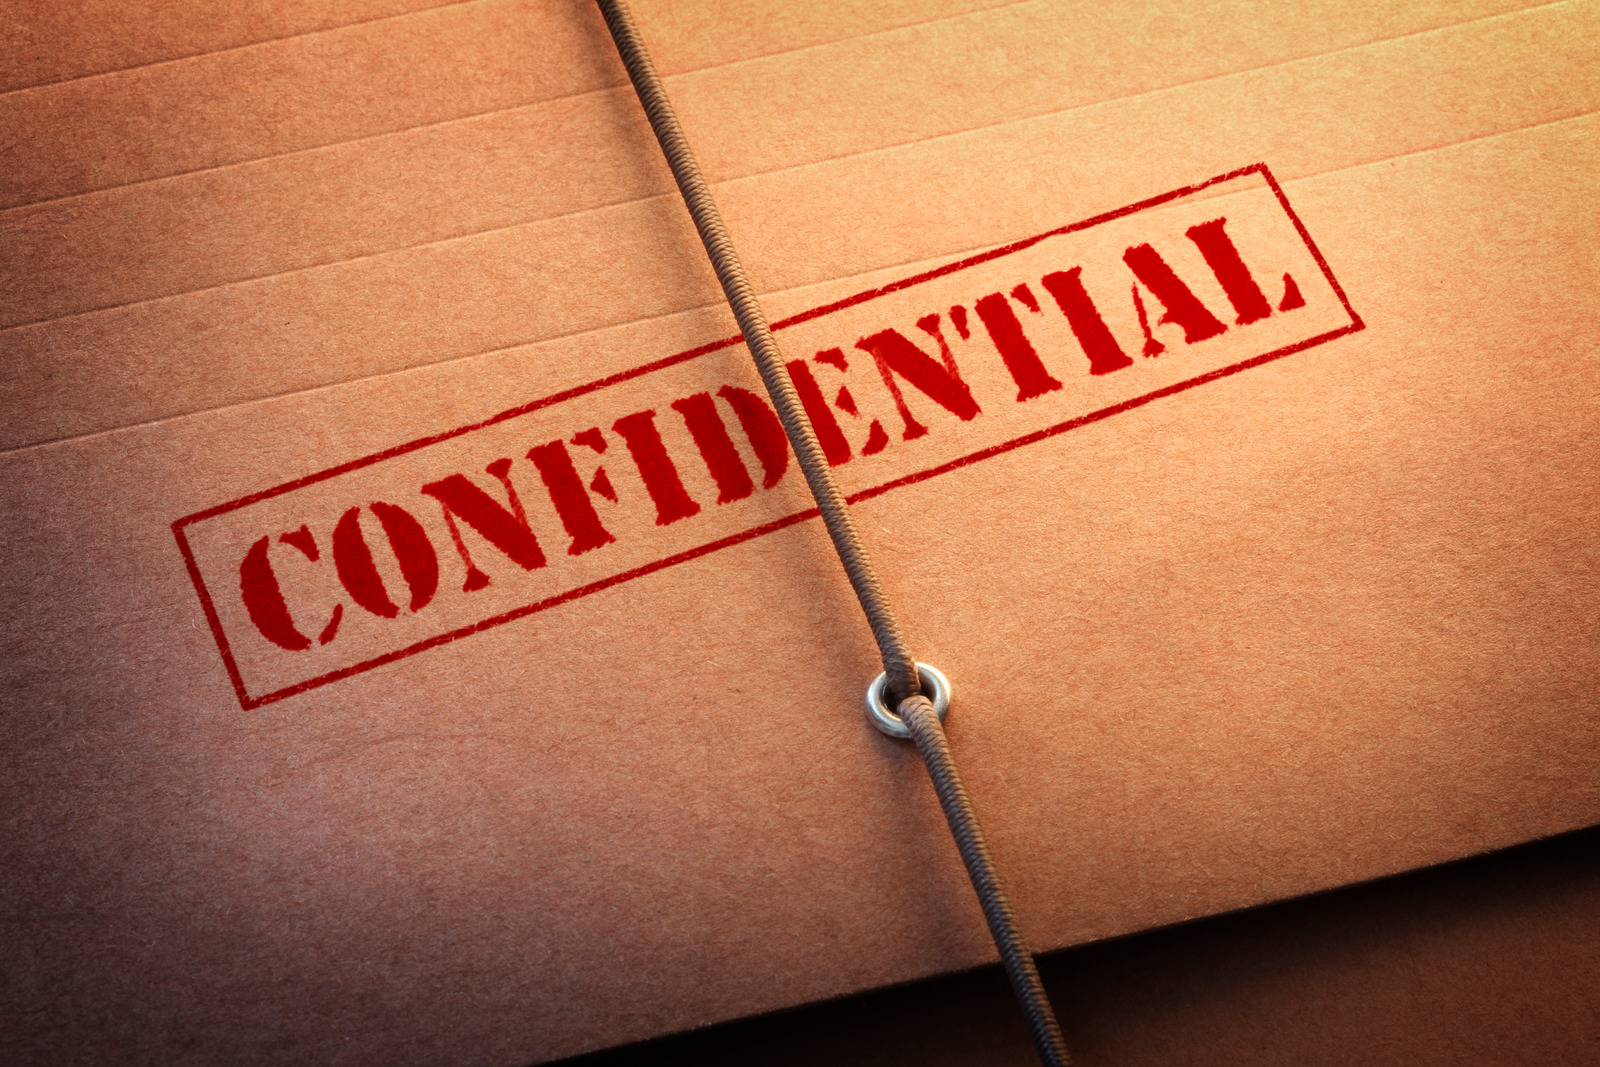 A close up of "Confidential" stamped on a file folder.